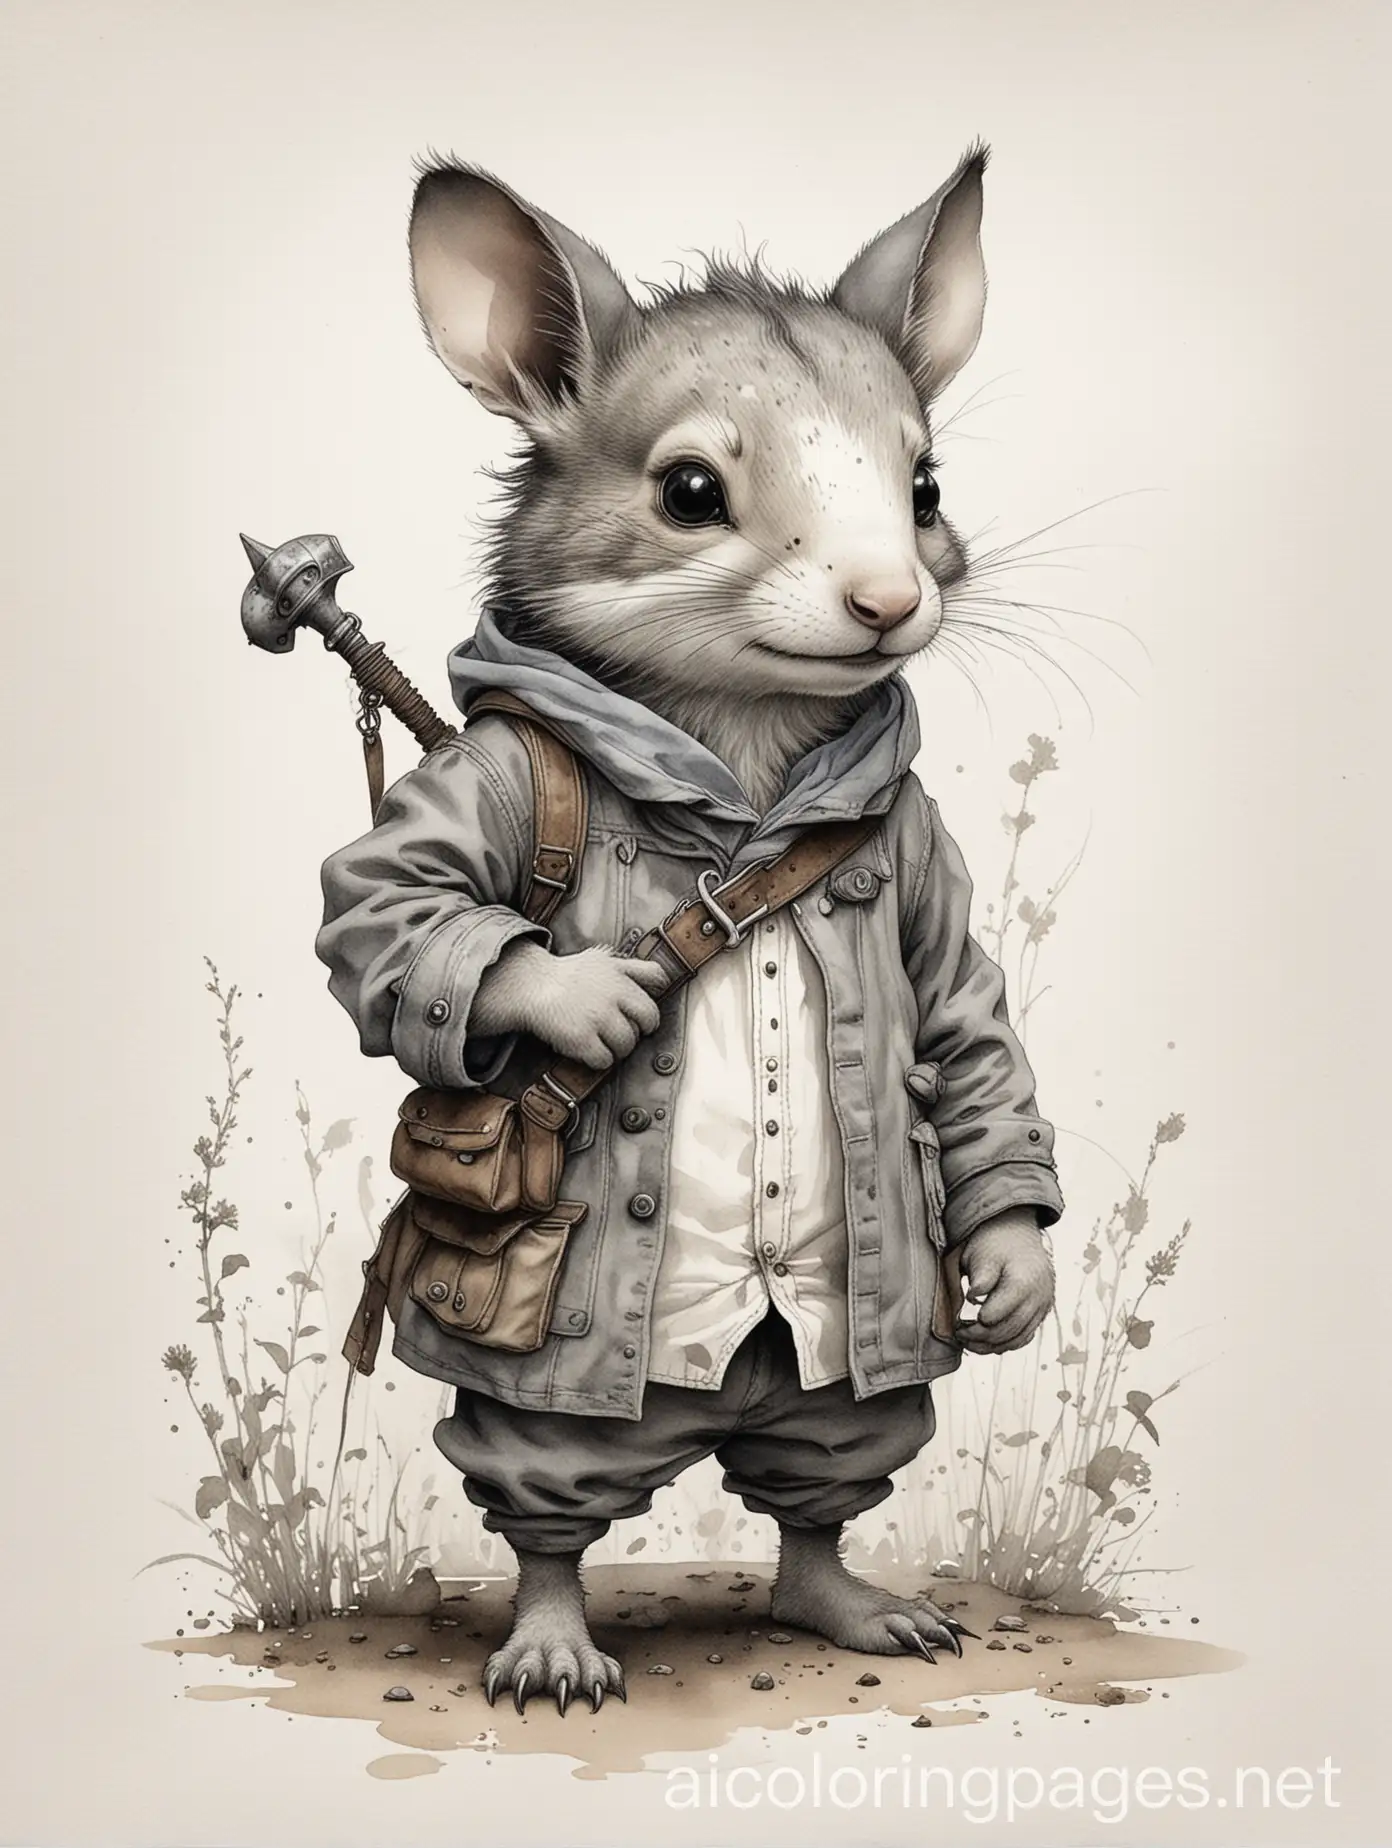 Cute-Little-Animal-Watercolor-Painting-Coloring-Page-by-JeanBaptiste-Monge